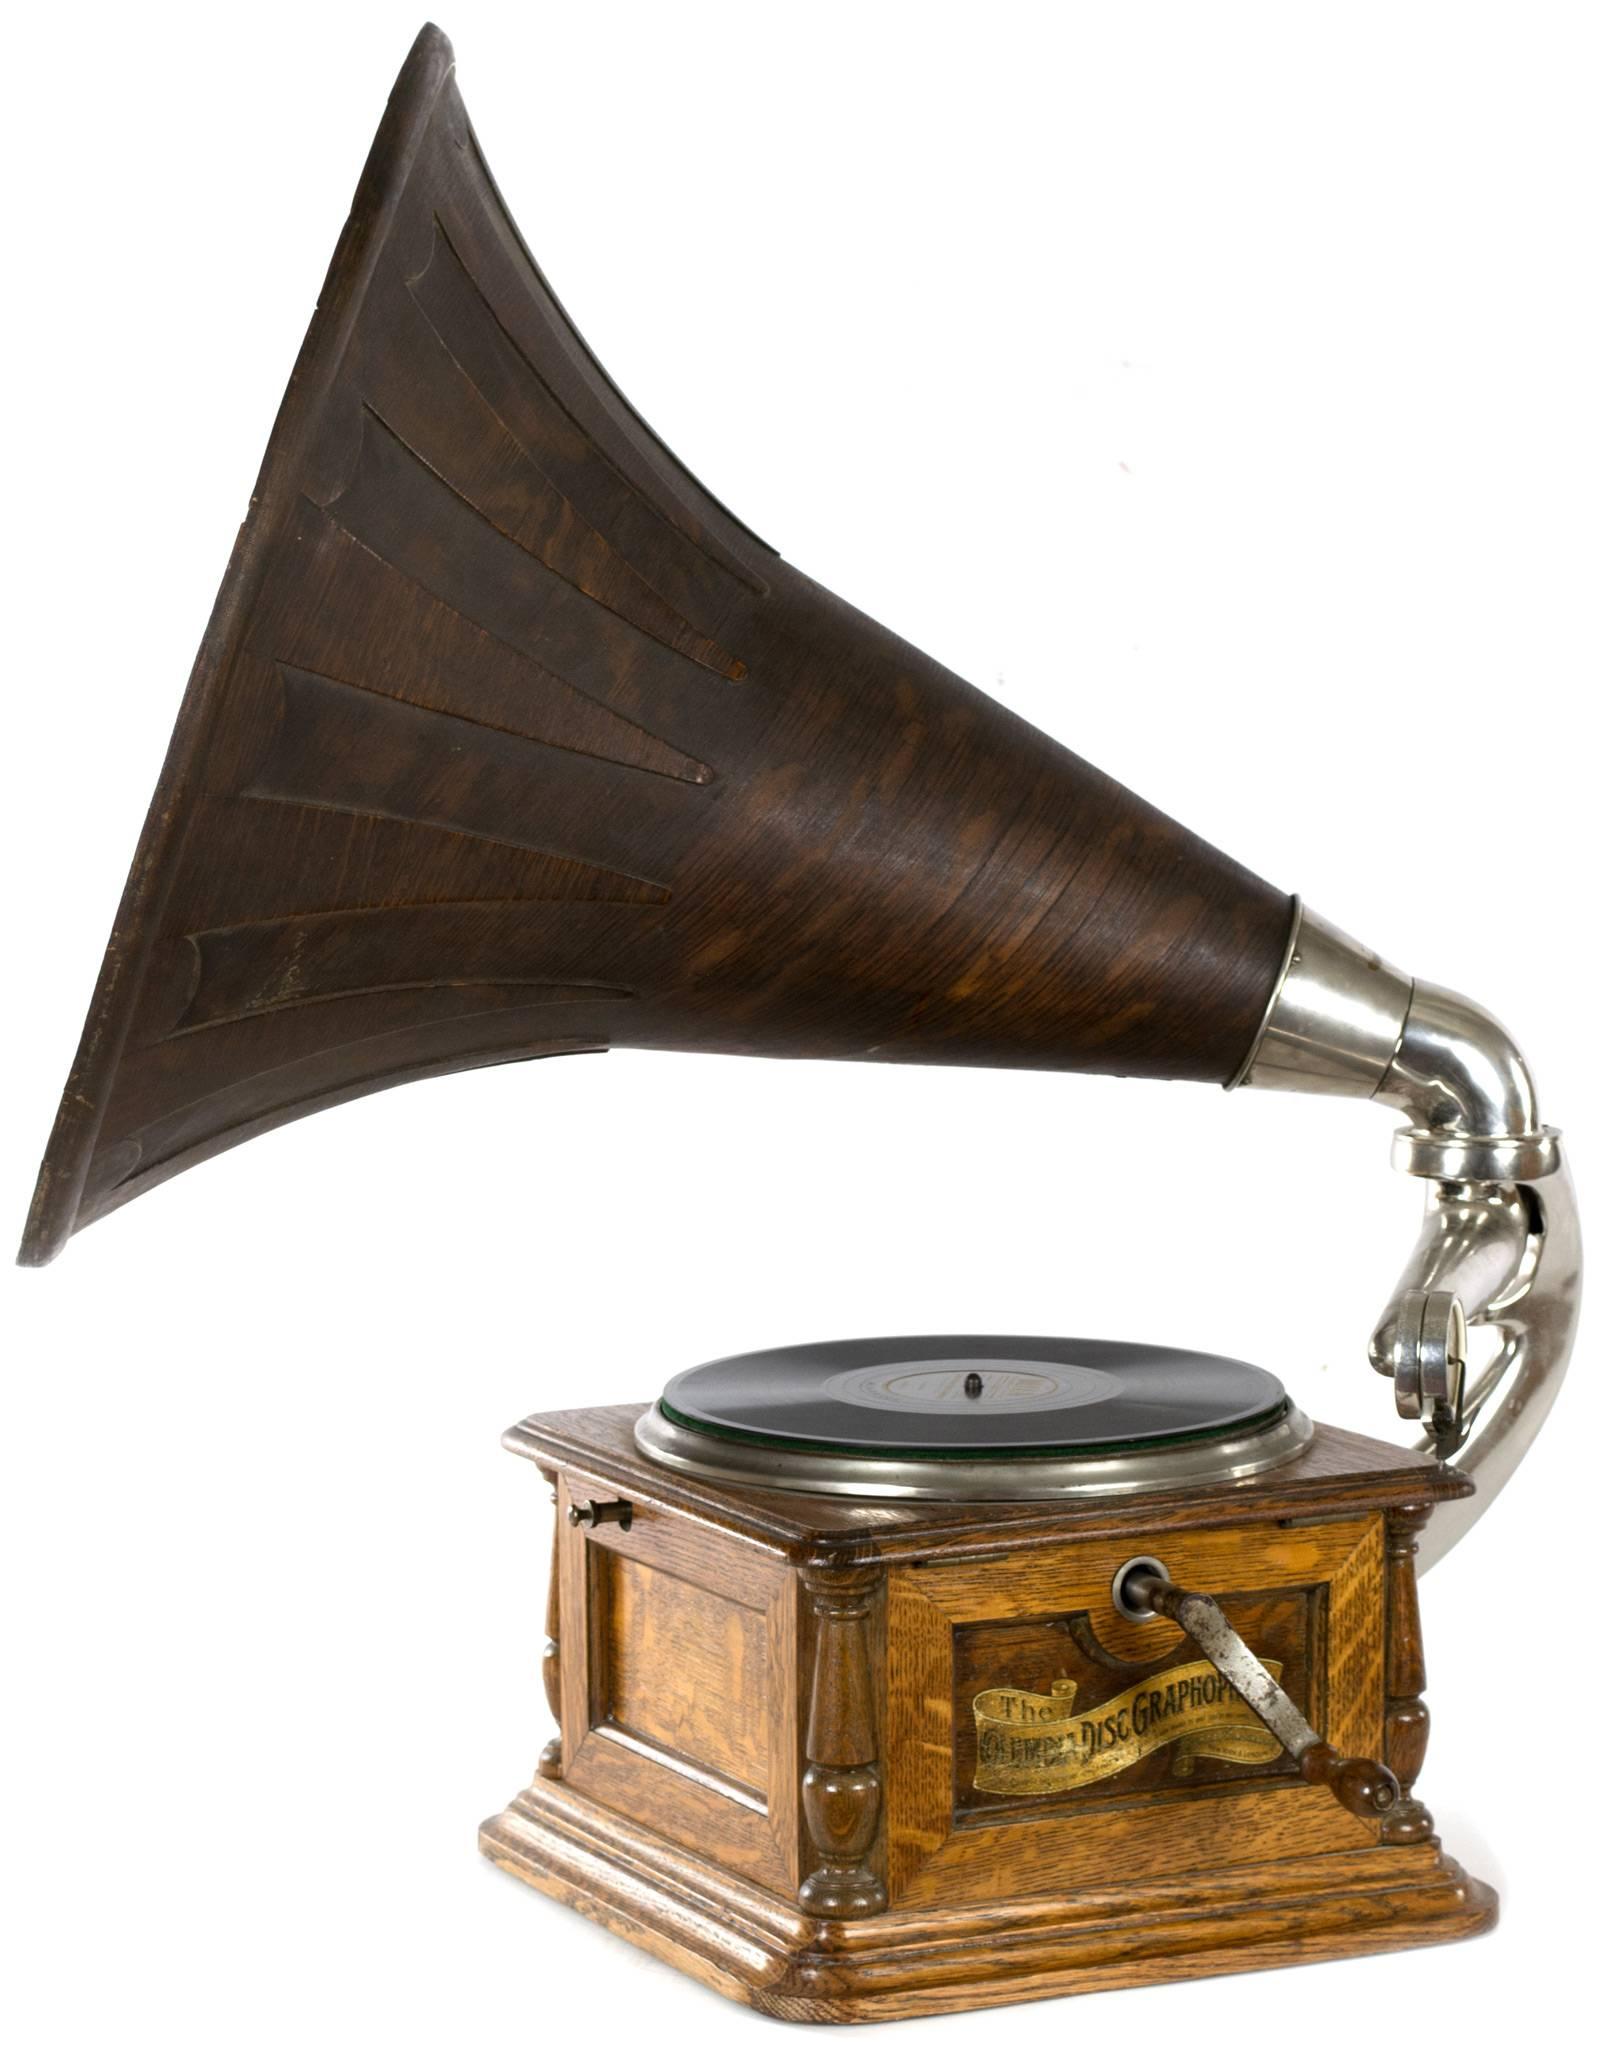 A 1904, BI Model of the Columbia Graphophone record player, with a very fine, carved-oak horn. The player is in fine working condition, and produced a warm sound.